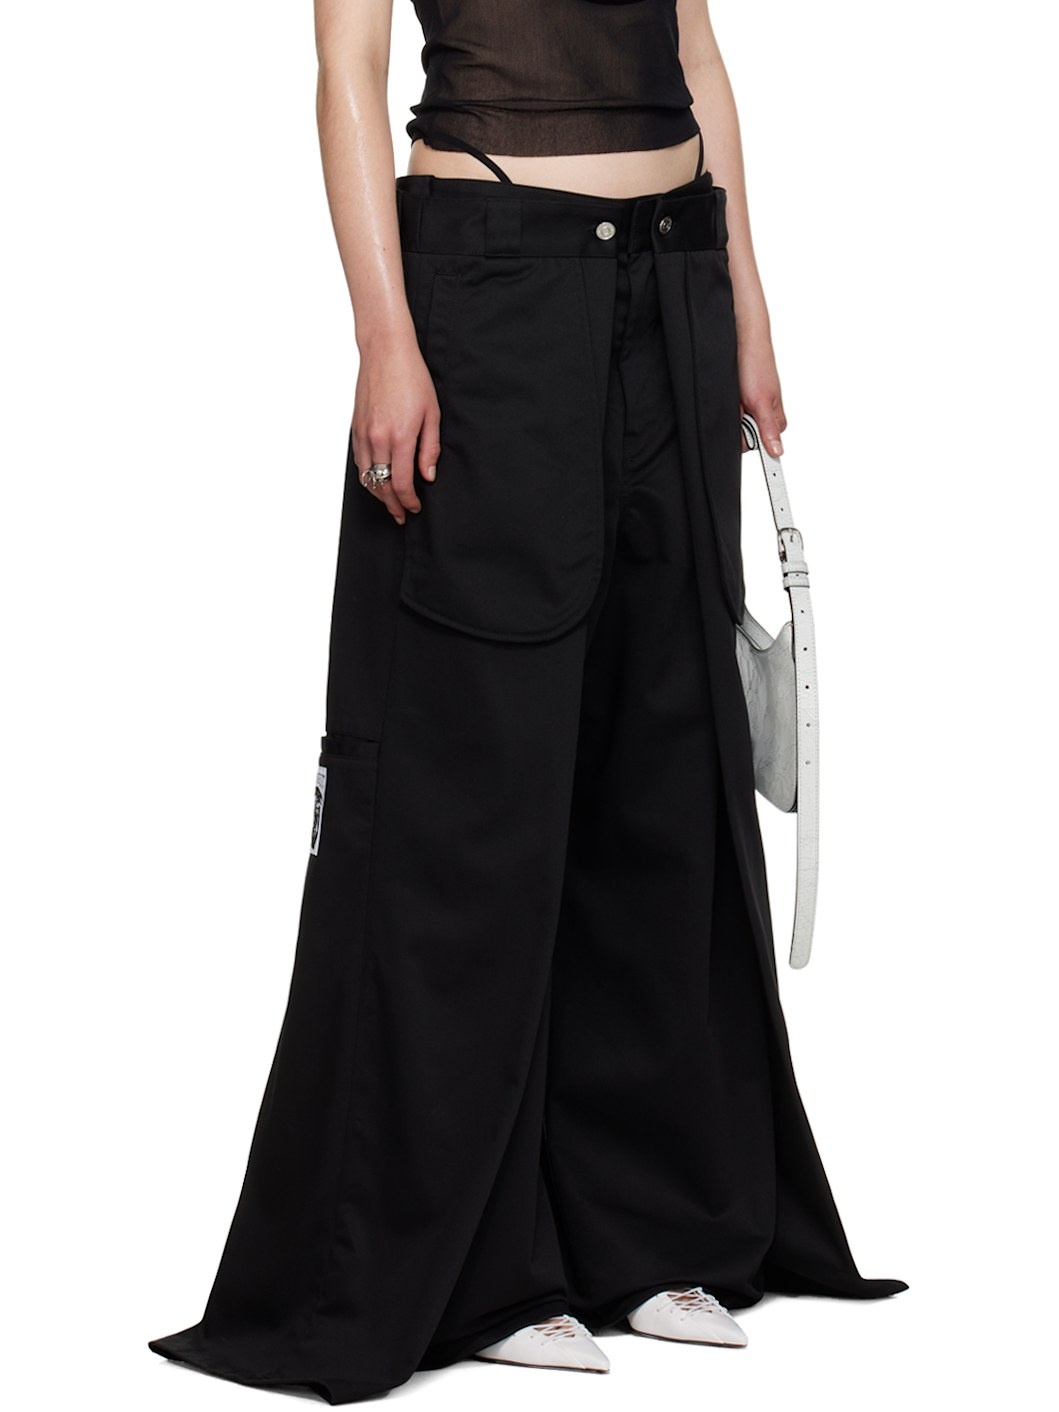 Black Shayne Oliver Edition 'The Wrap' Trousers - 2